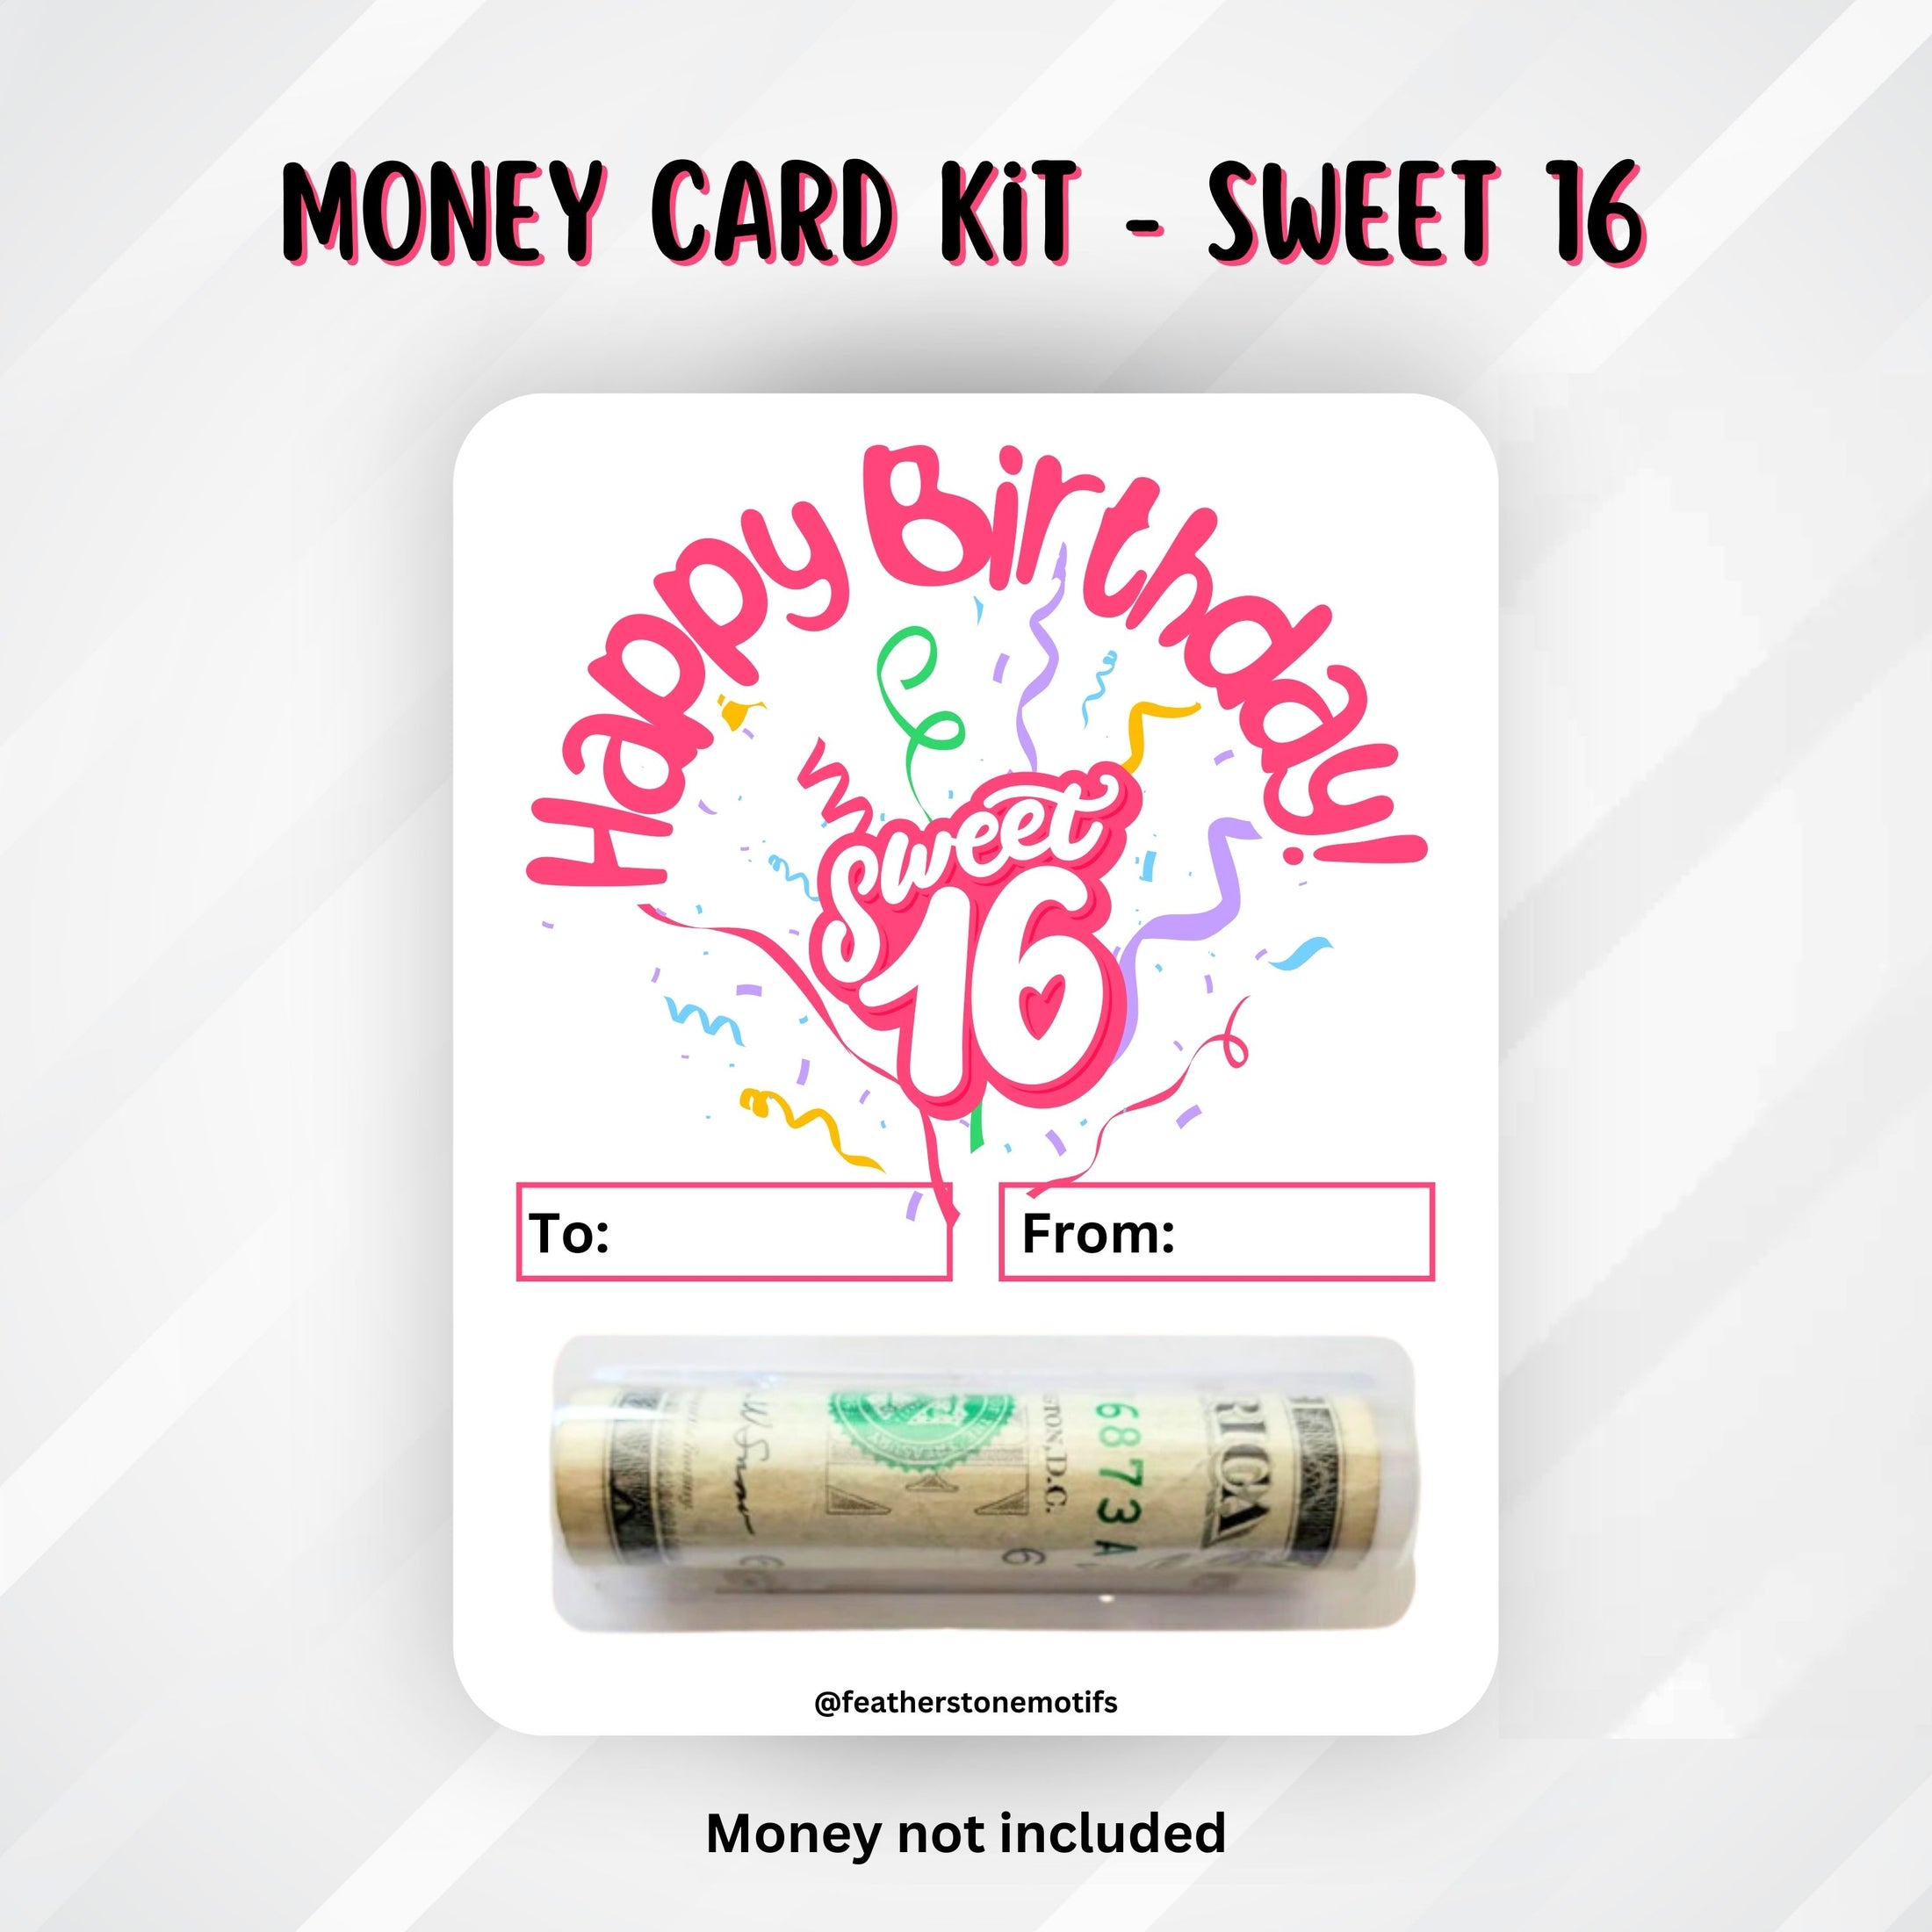 This image shows the money tube attached to the Sweet 16 Birthday money card.